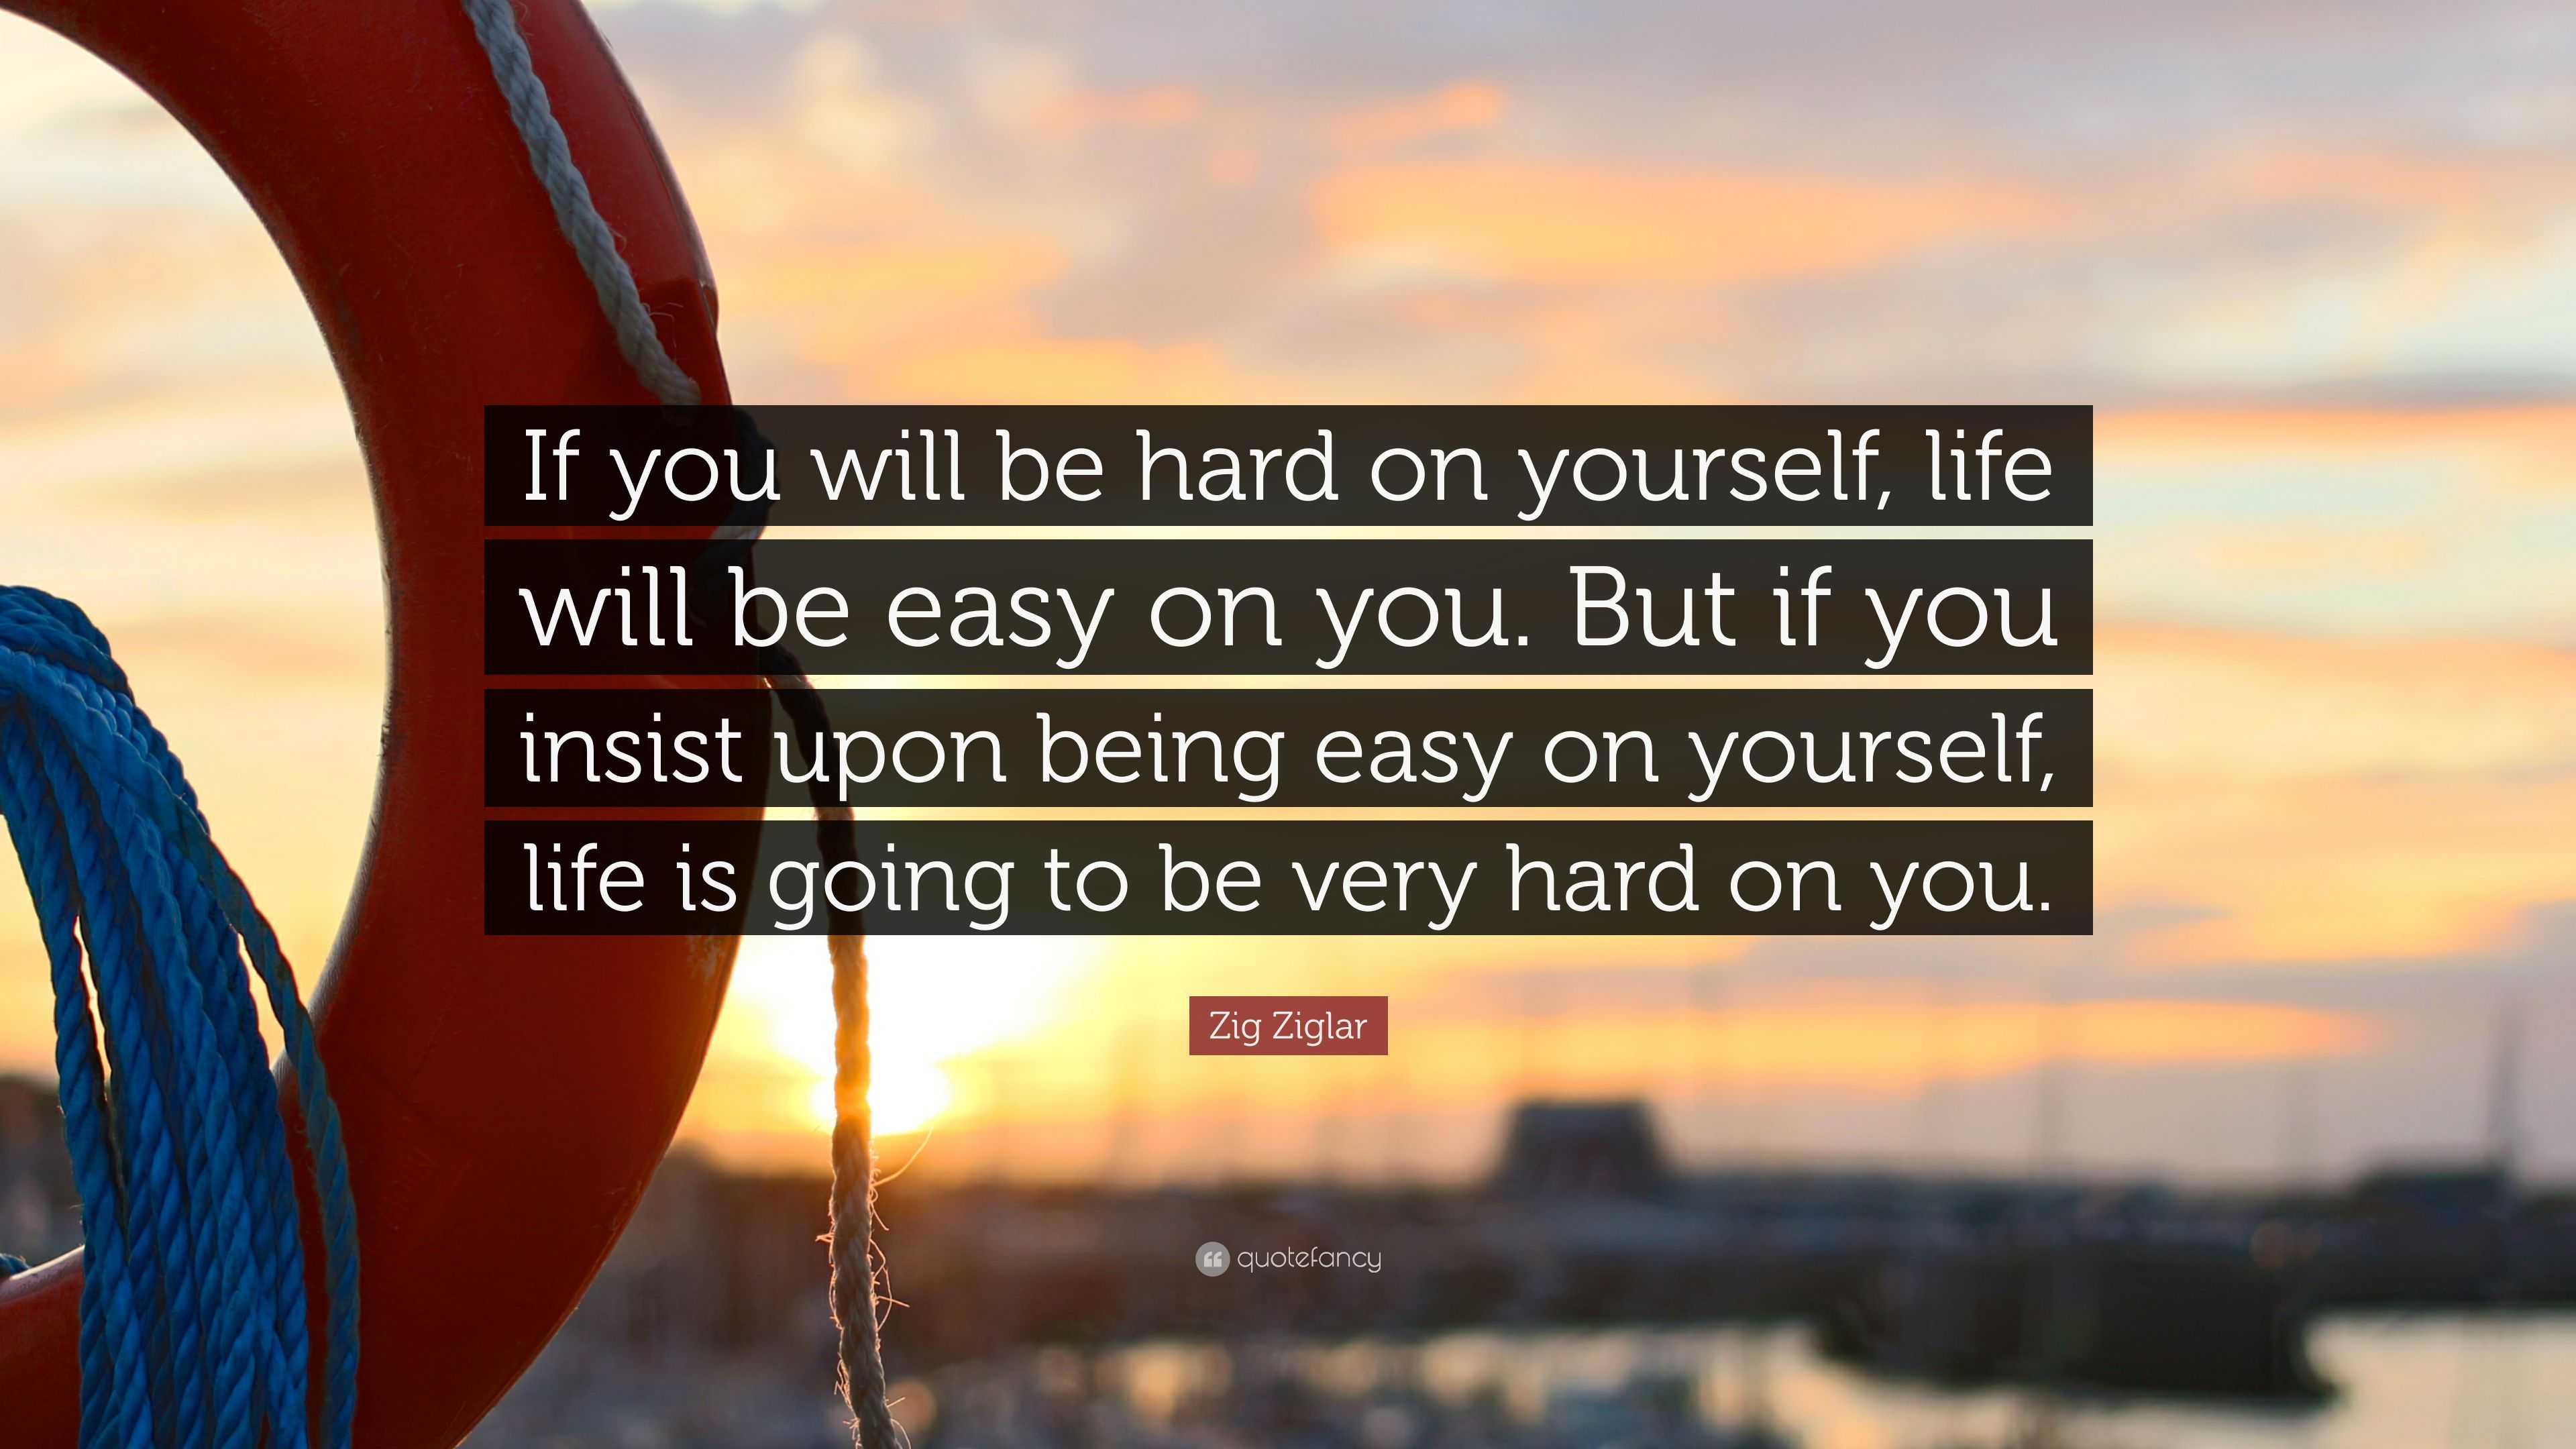 2032811 Zig Ziglar Quote If you will be hard on yourself life will be easy